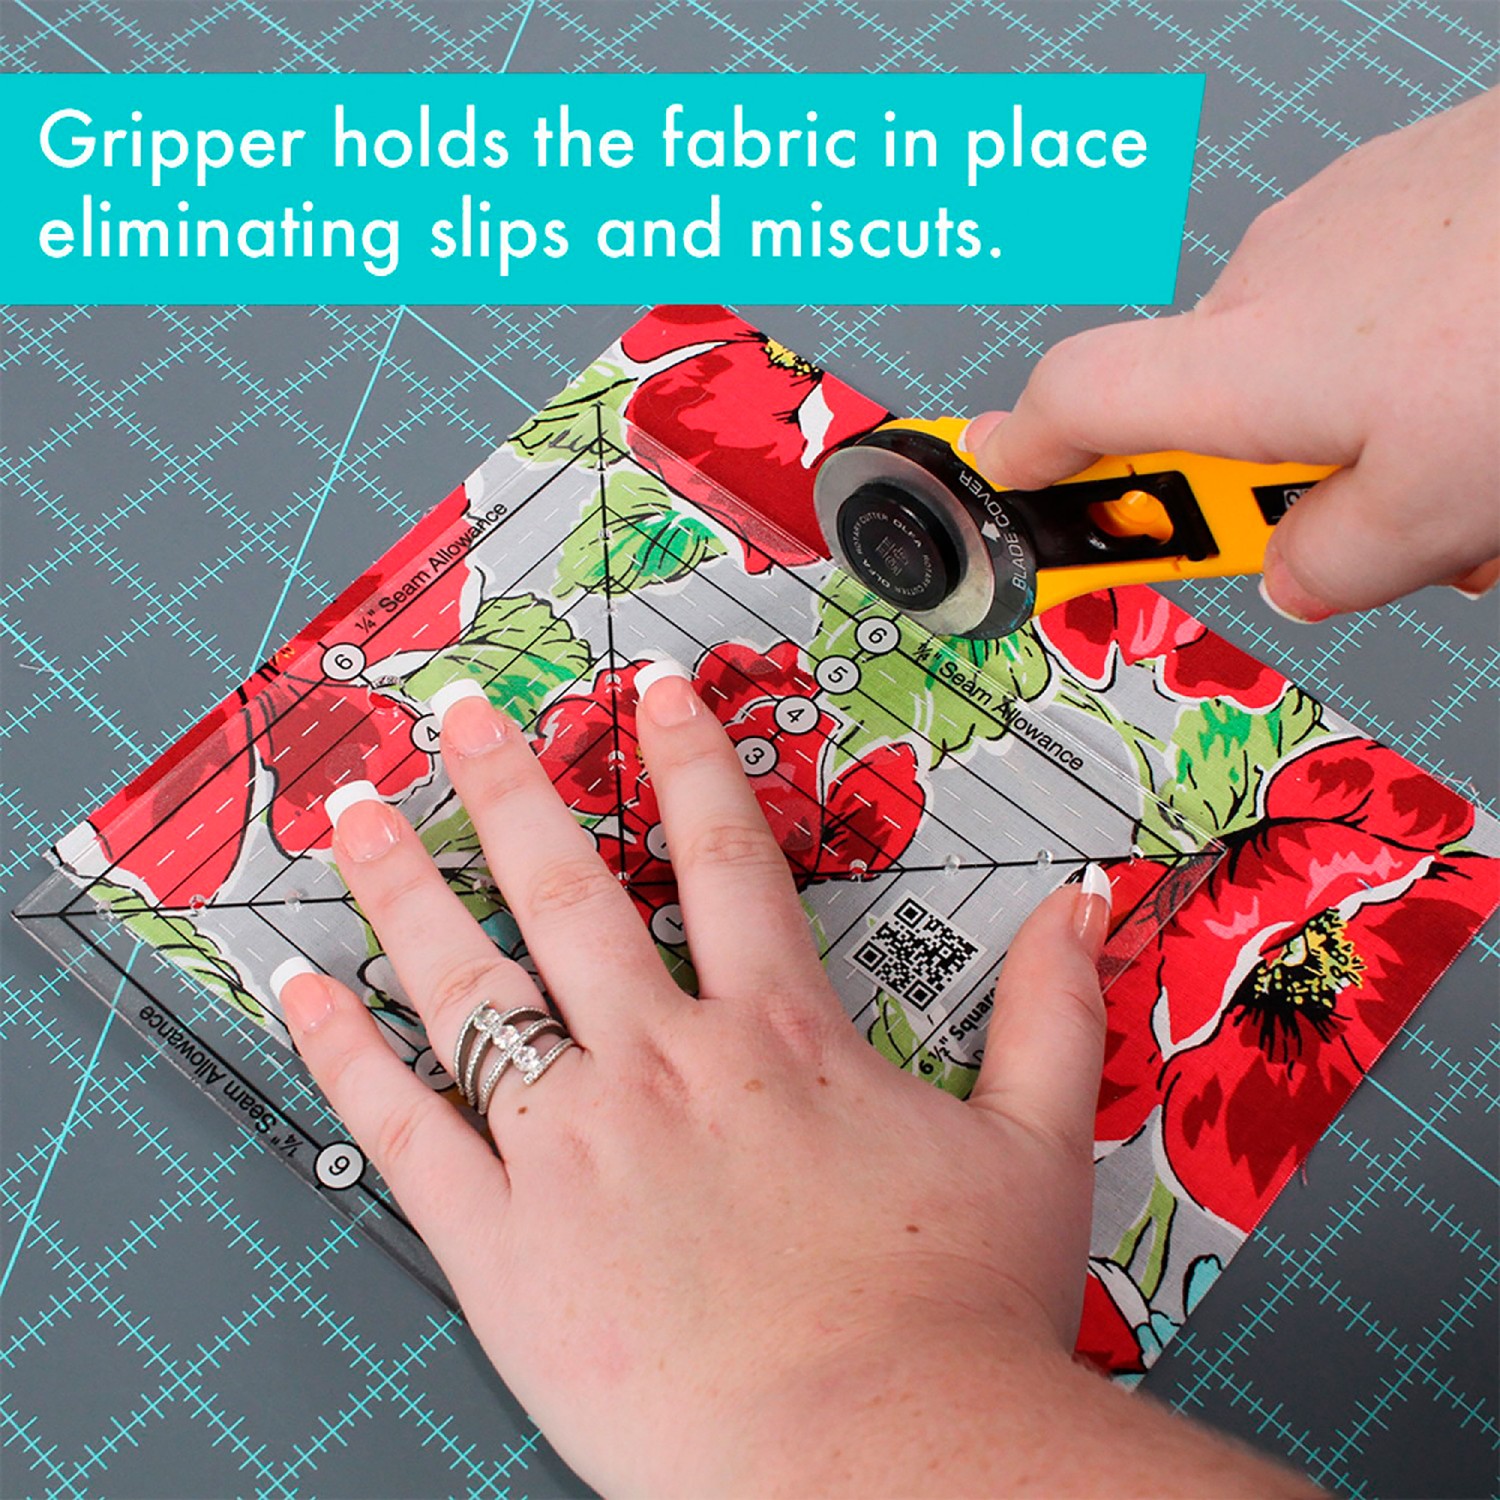 Creative Grids 14 1/2 Square It Up or Fussy Cut Square Sewing & Quilting  Ruler